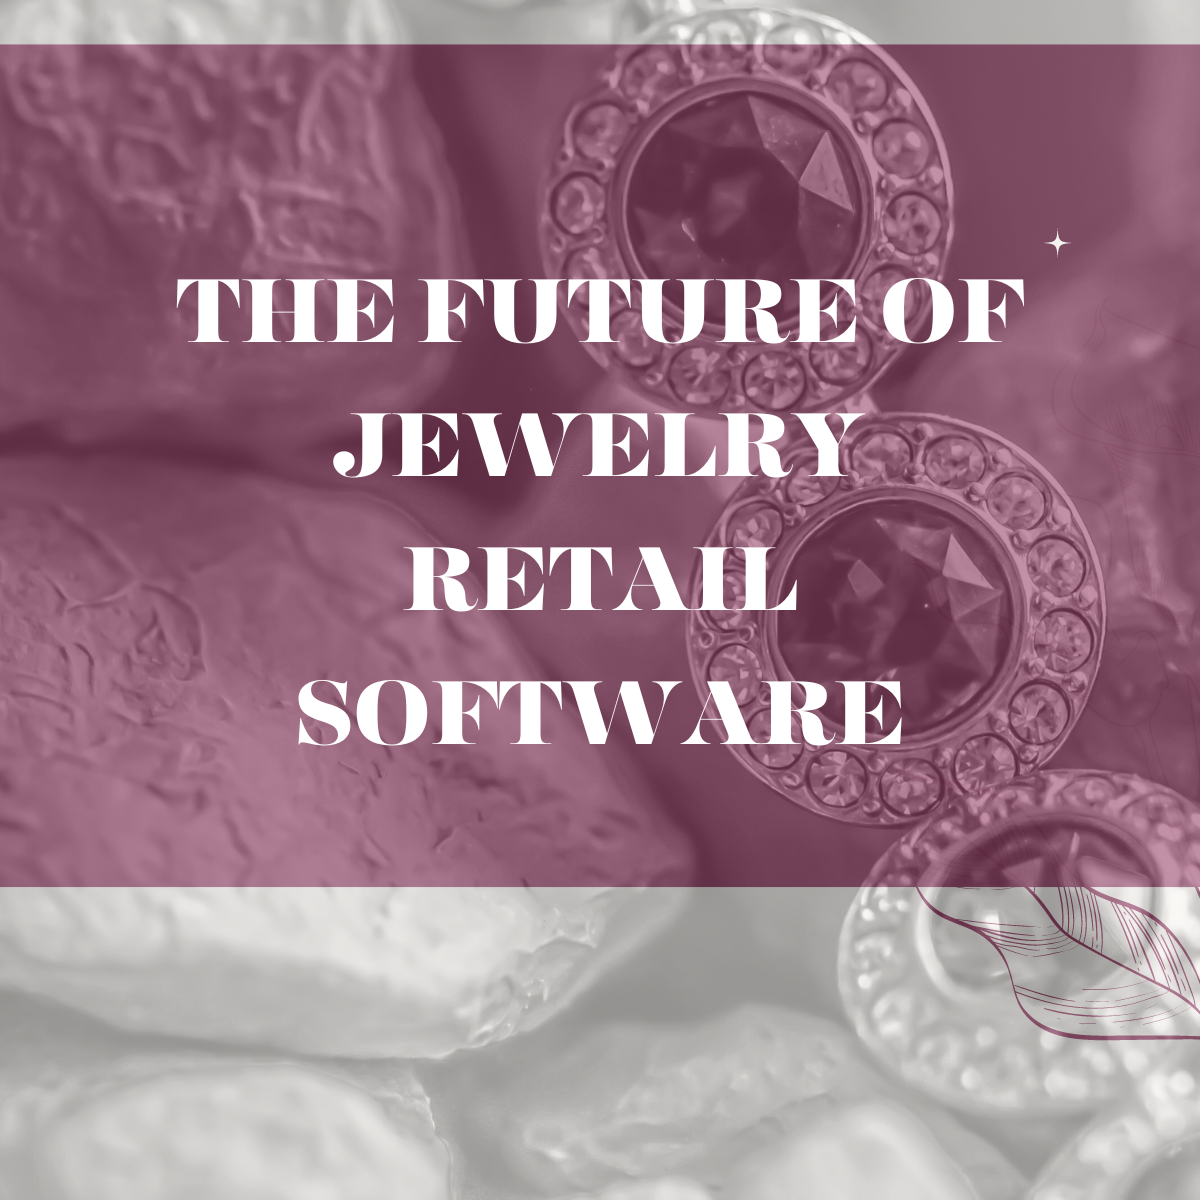 The Future of jewelry retail software